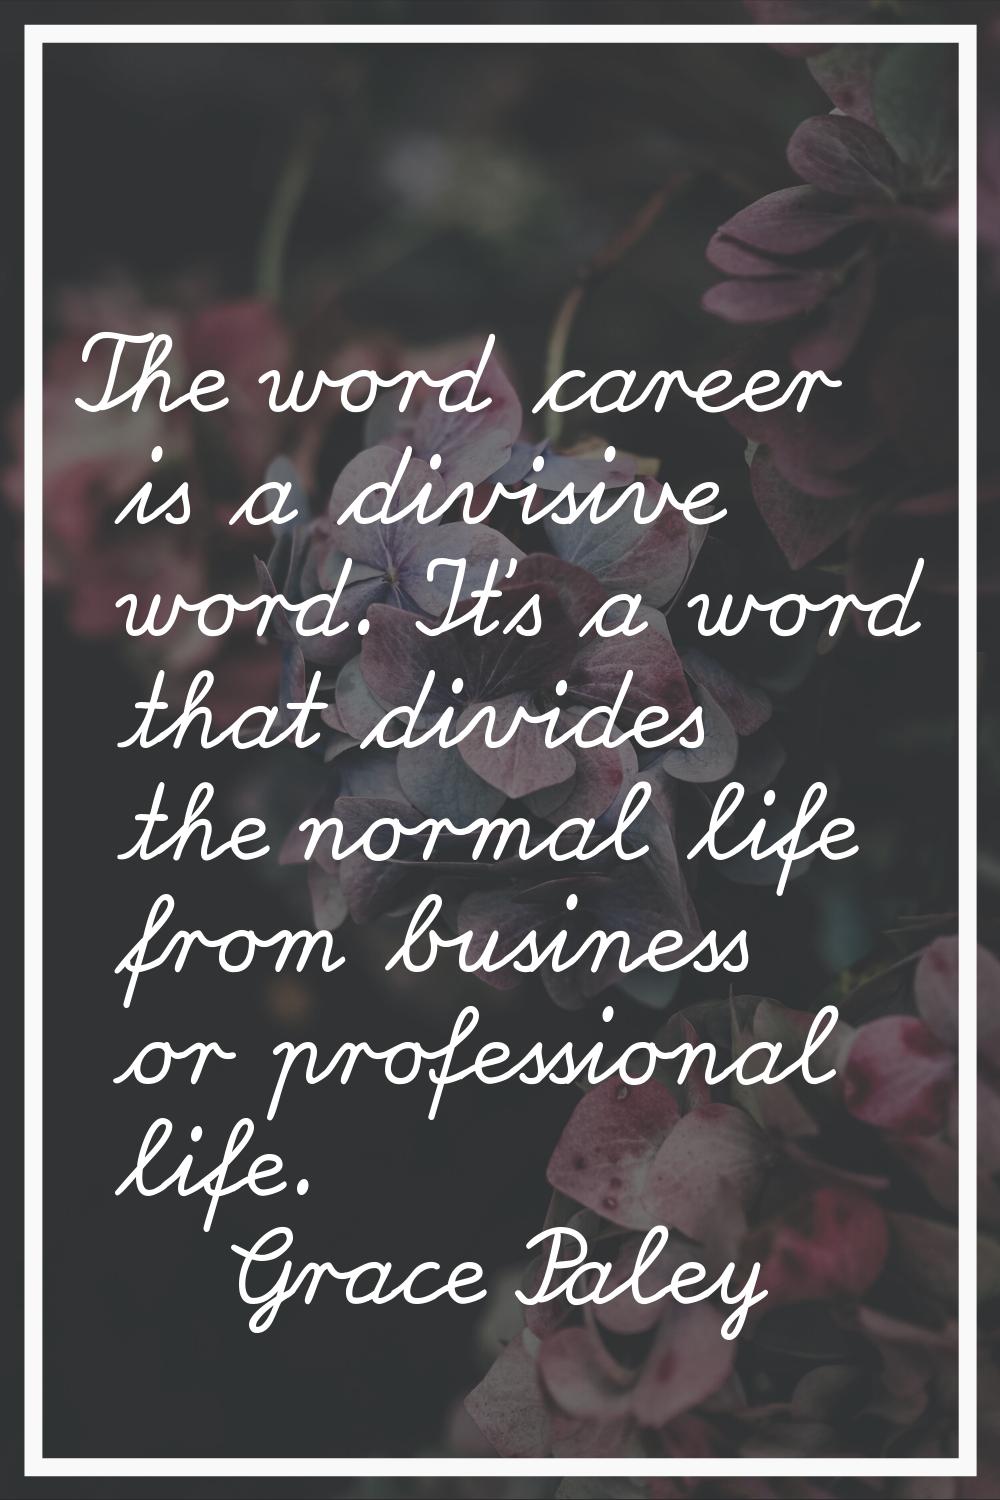 The word career is a divisive word. It's a word that divides the normal life from business or profe